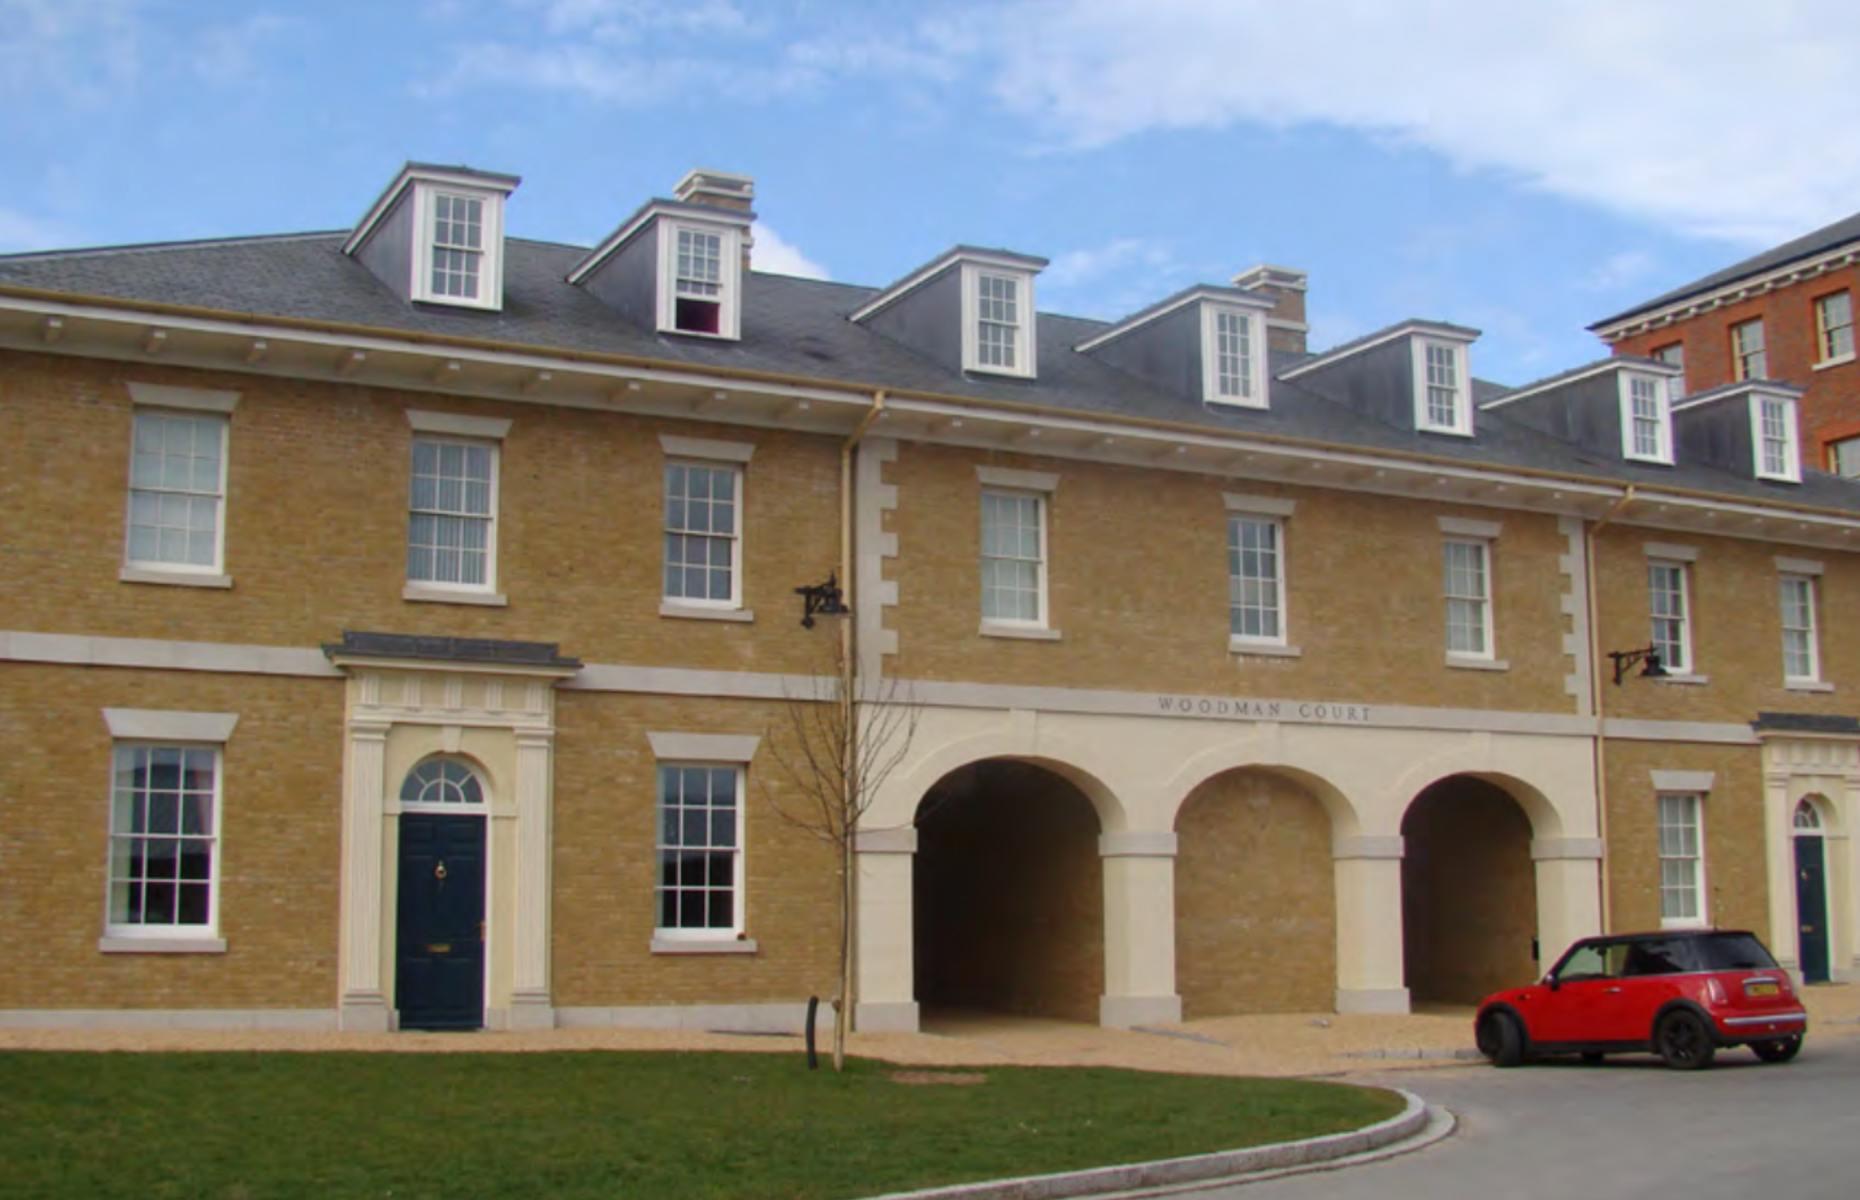 <p>The second phase of the project was granted planning permission in 1999 and provided 900 dwellings and six hectares of employment space over a ten-year development period. In Poundbury, 35% of homes being built are affordable housing for rental or shared ownership by local people. <a href="https://www.loveproperty.com/news/86492/affordable-housing-flatpack-ikea-villages-coming-to-the-uk">Affordable homes</a> are integrated with private homes and built to the same high standards, so that they are almost indistinguishable.</p>